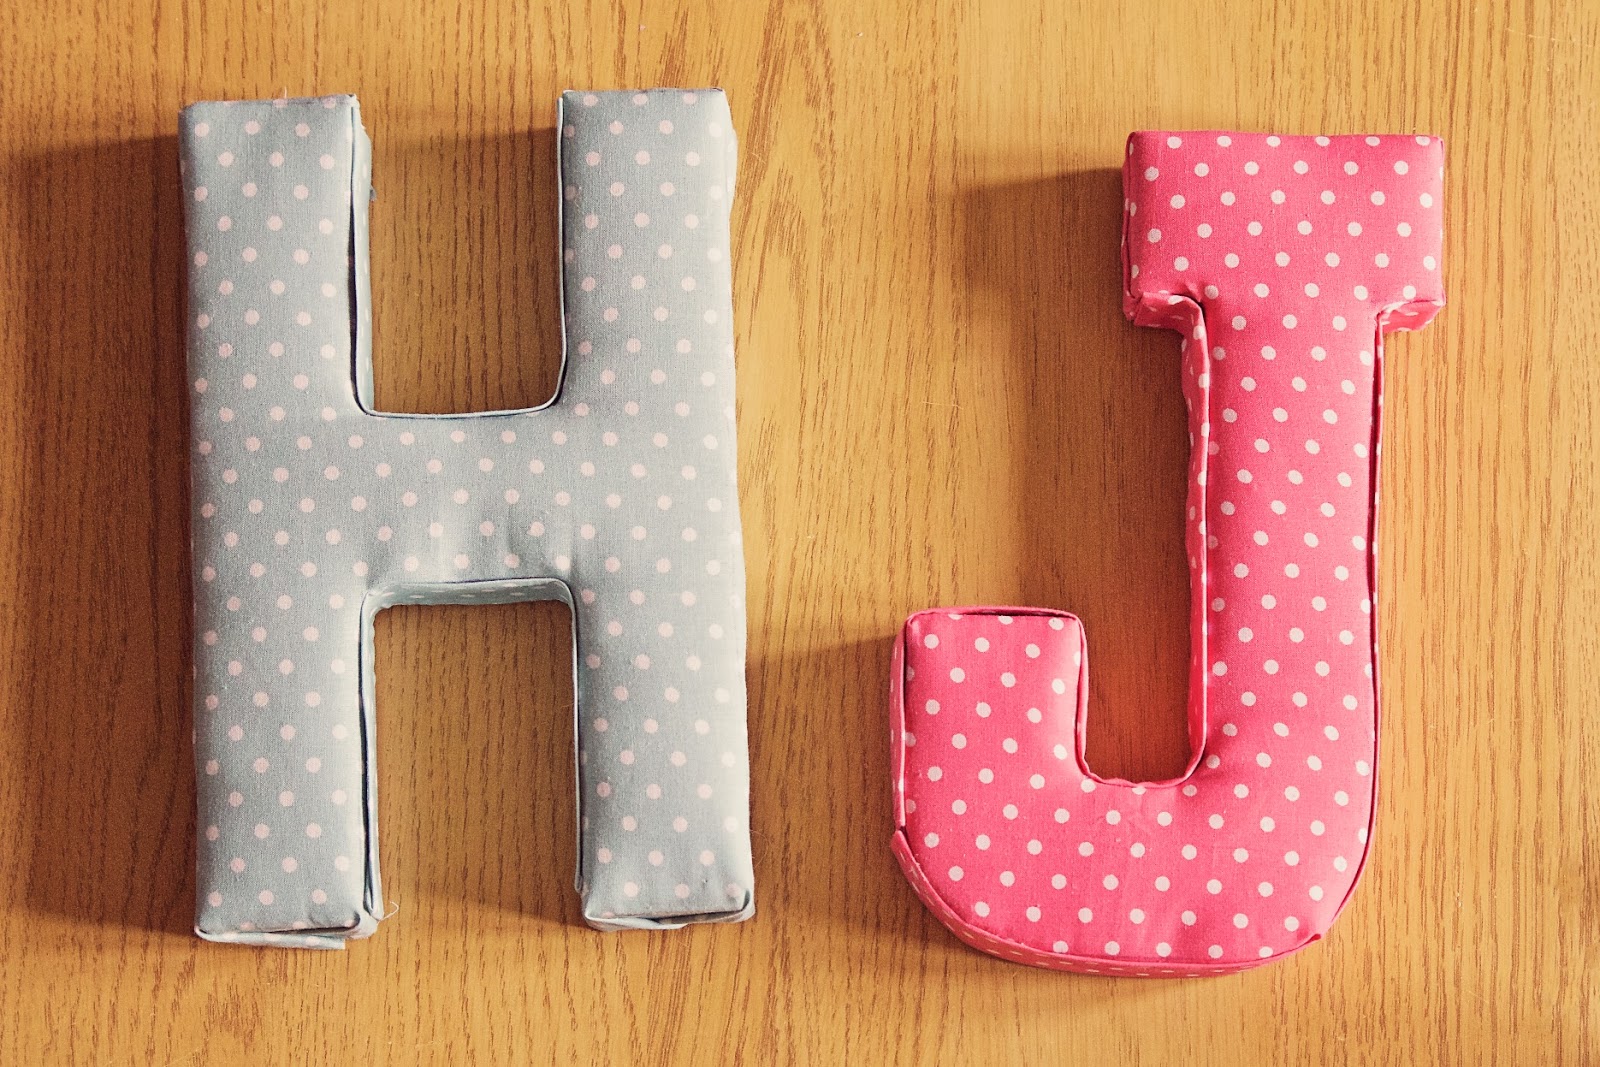 Completed fabric letters